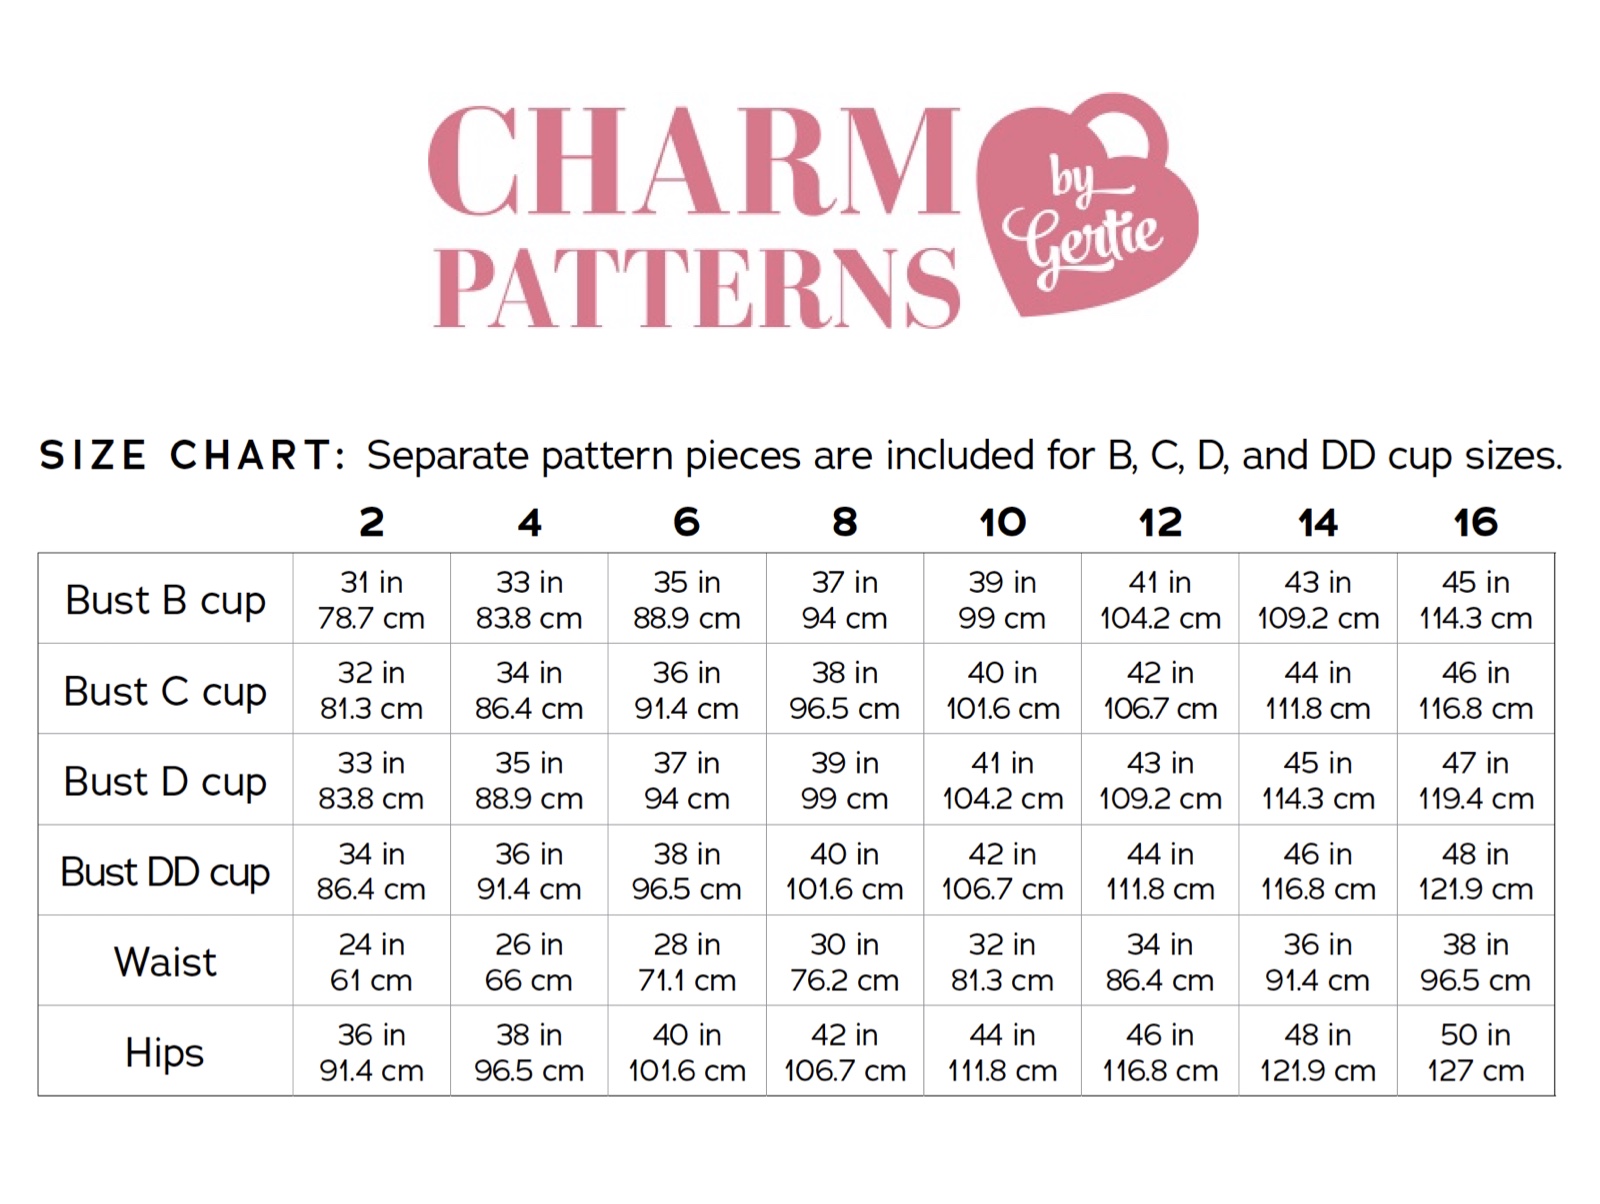 Charm Patterns by Gertie - I've finally realized my dream of